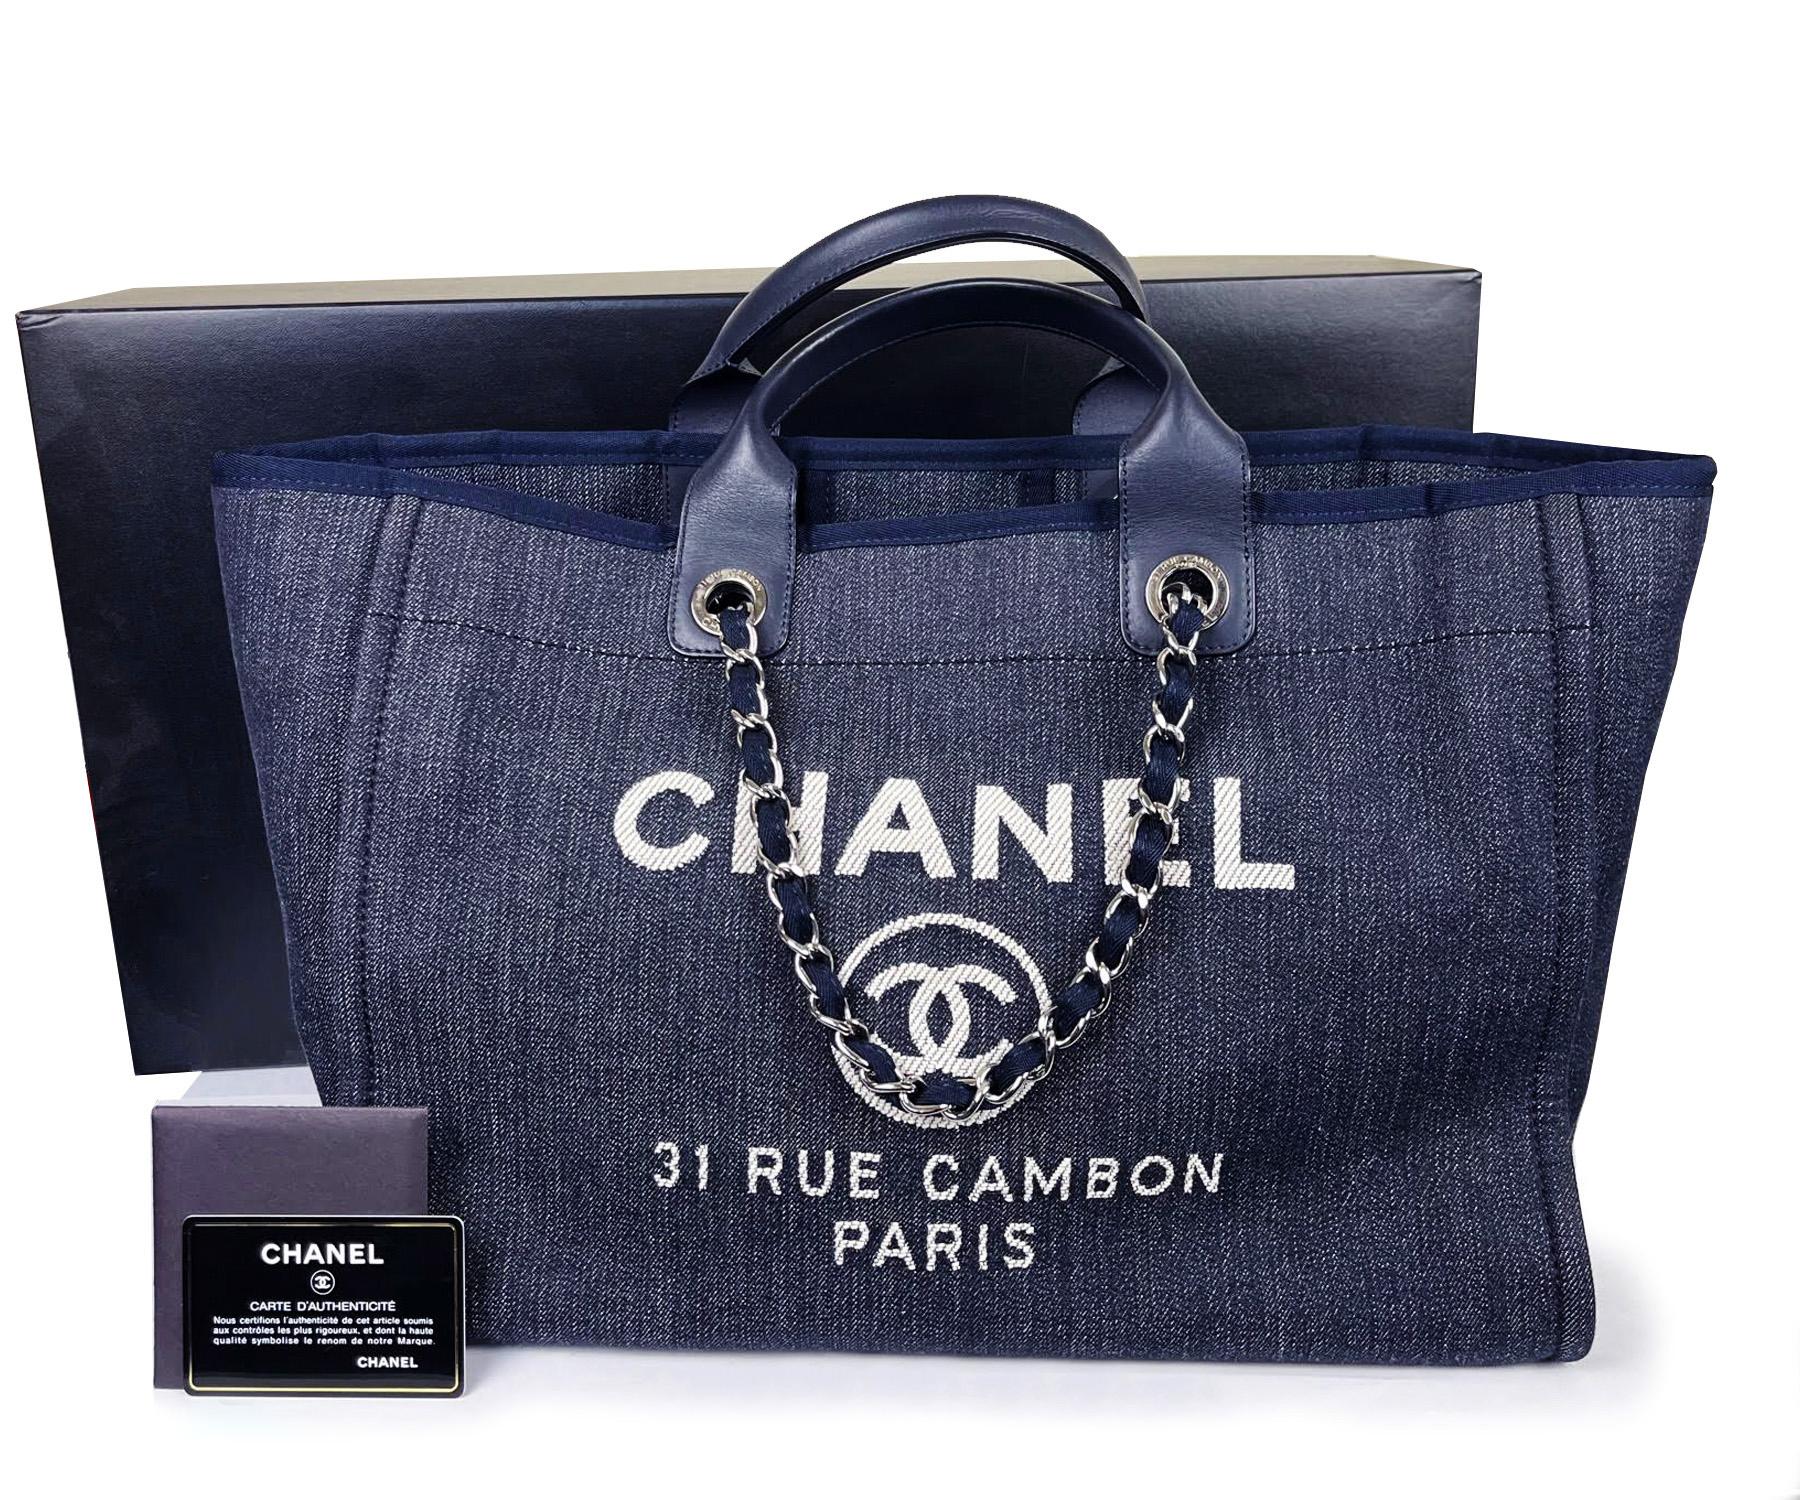 Chanel Sold Out Navy Denim Deauville Tote Shoulder Bag

*Marked 2318XXXX
*Made in Italy
*Comes with the original box, control number card and booklet
* As seen on Rihanna and Miranda Kerr
* Silver Hardware

-It is approximately 14.75